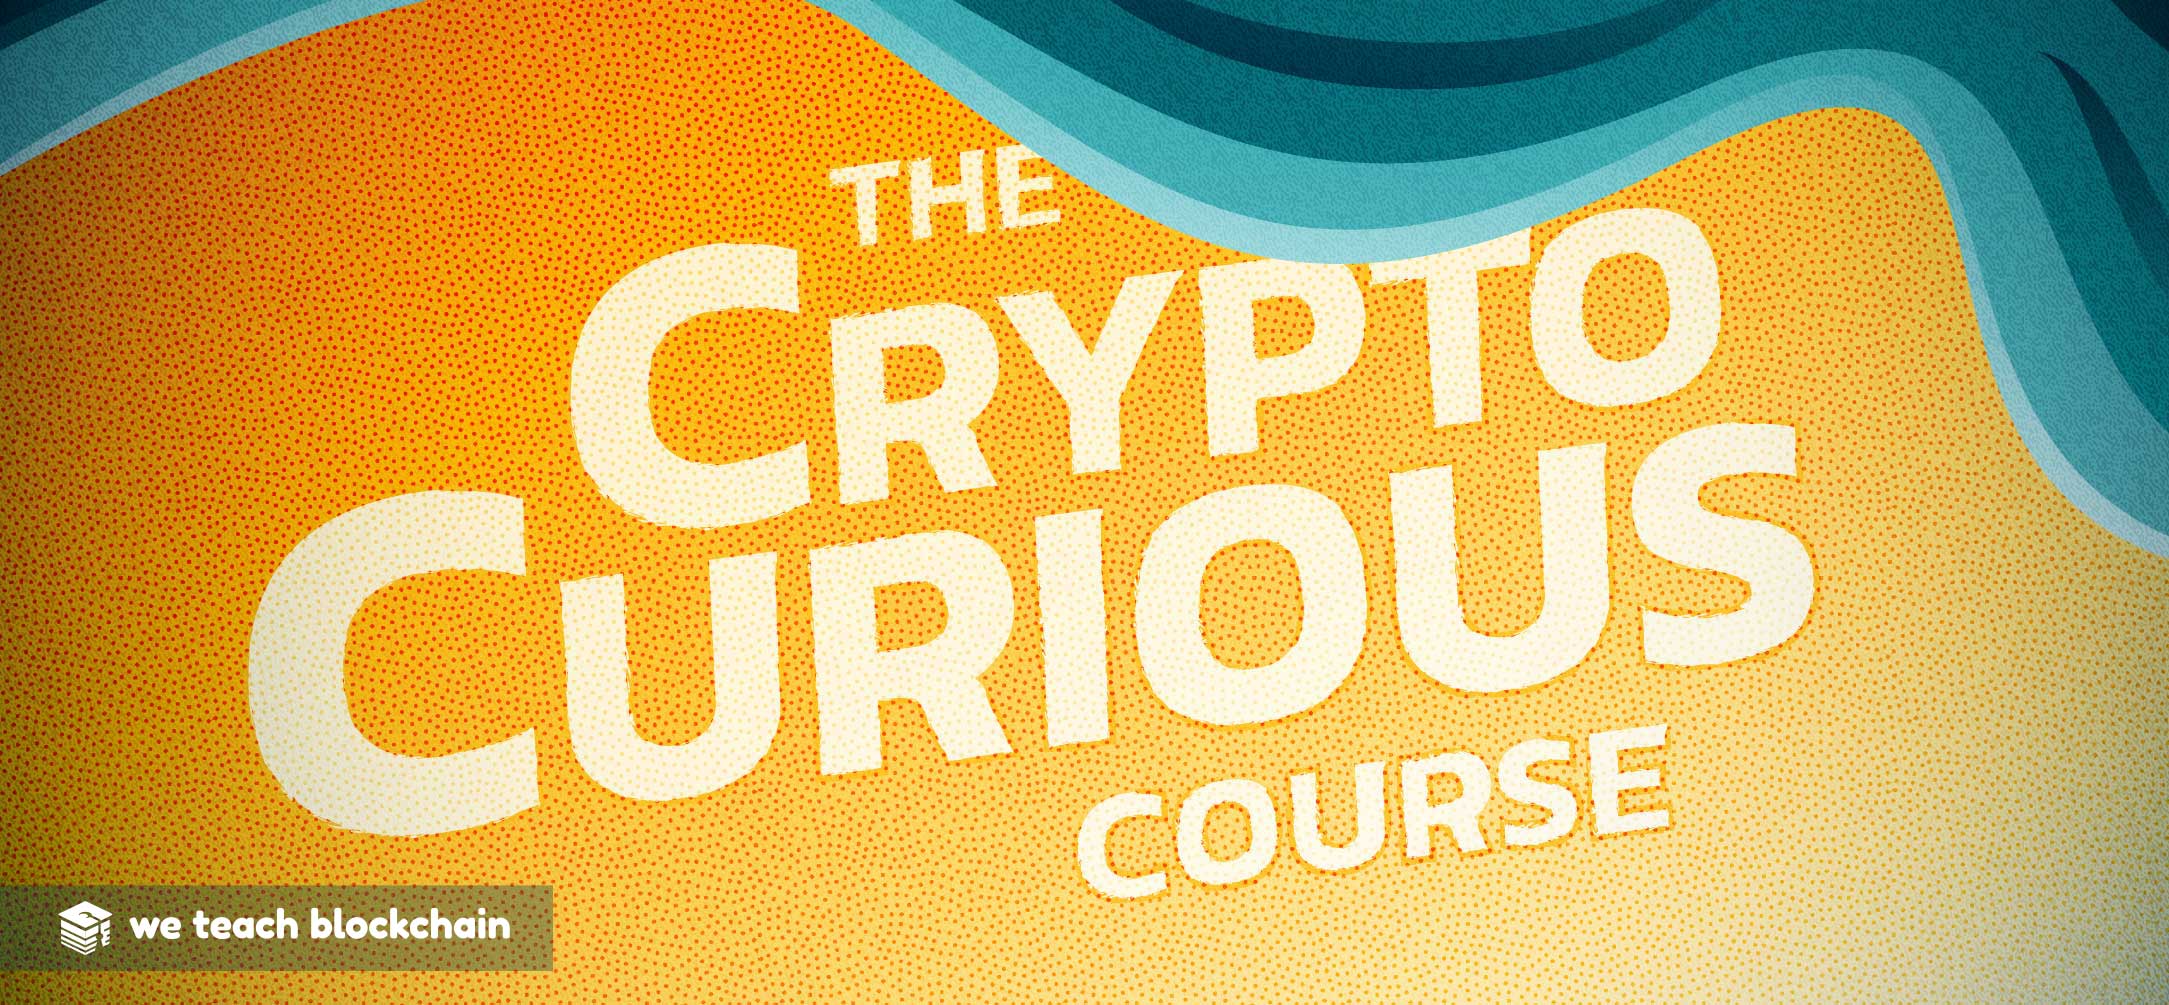 The Crypto Curious Course Part Two